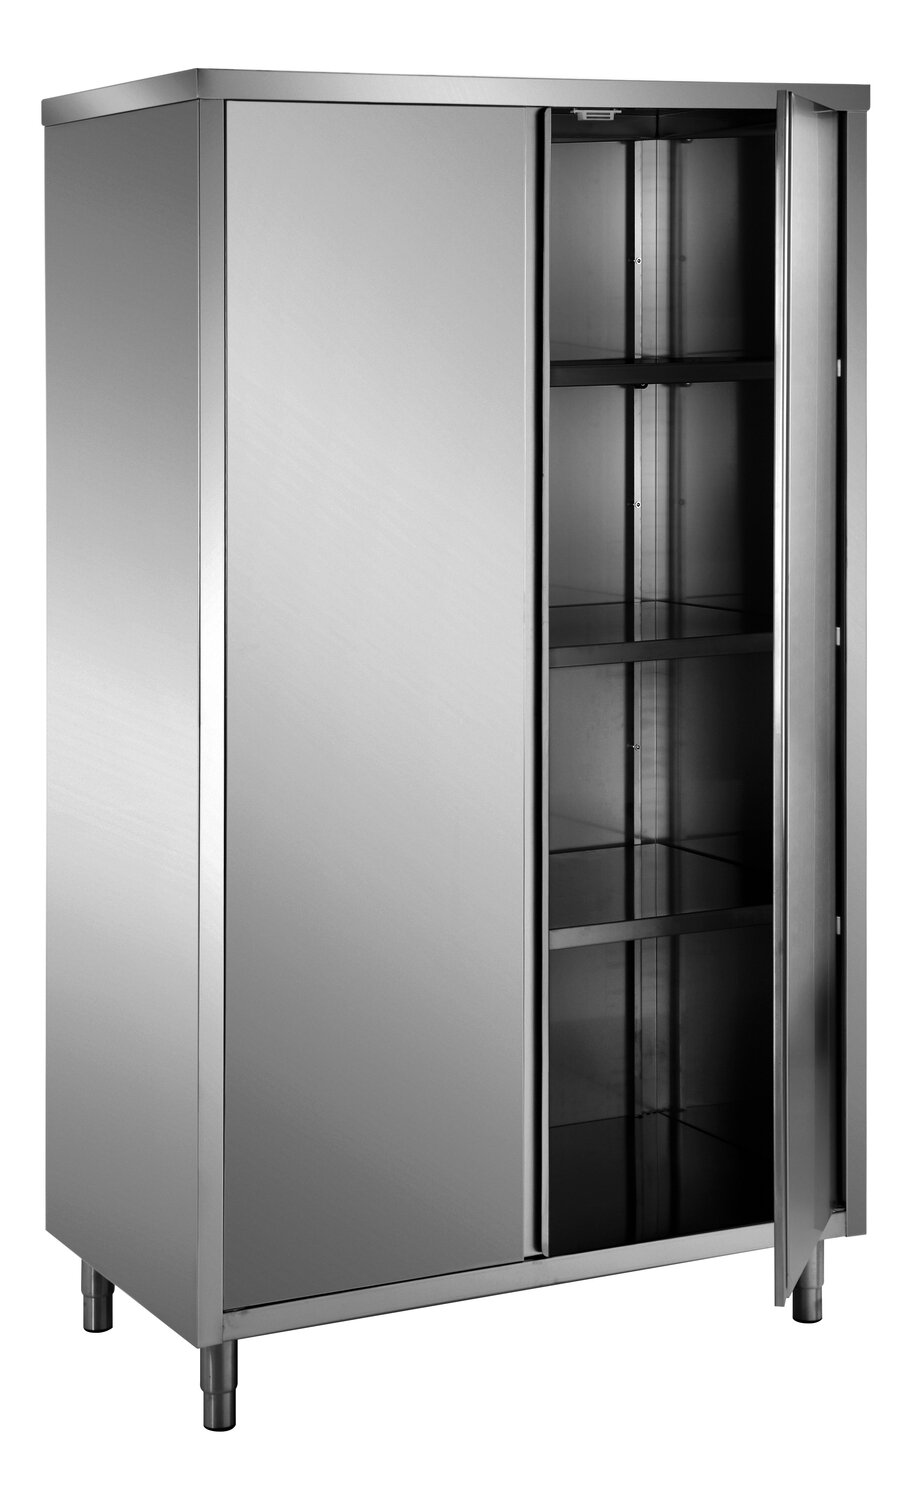 SARO Stainless steel storage cabinets with 2 hinged doors 1200x600 AISI 304